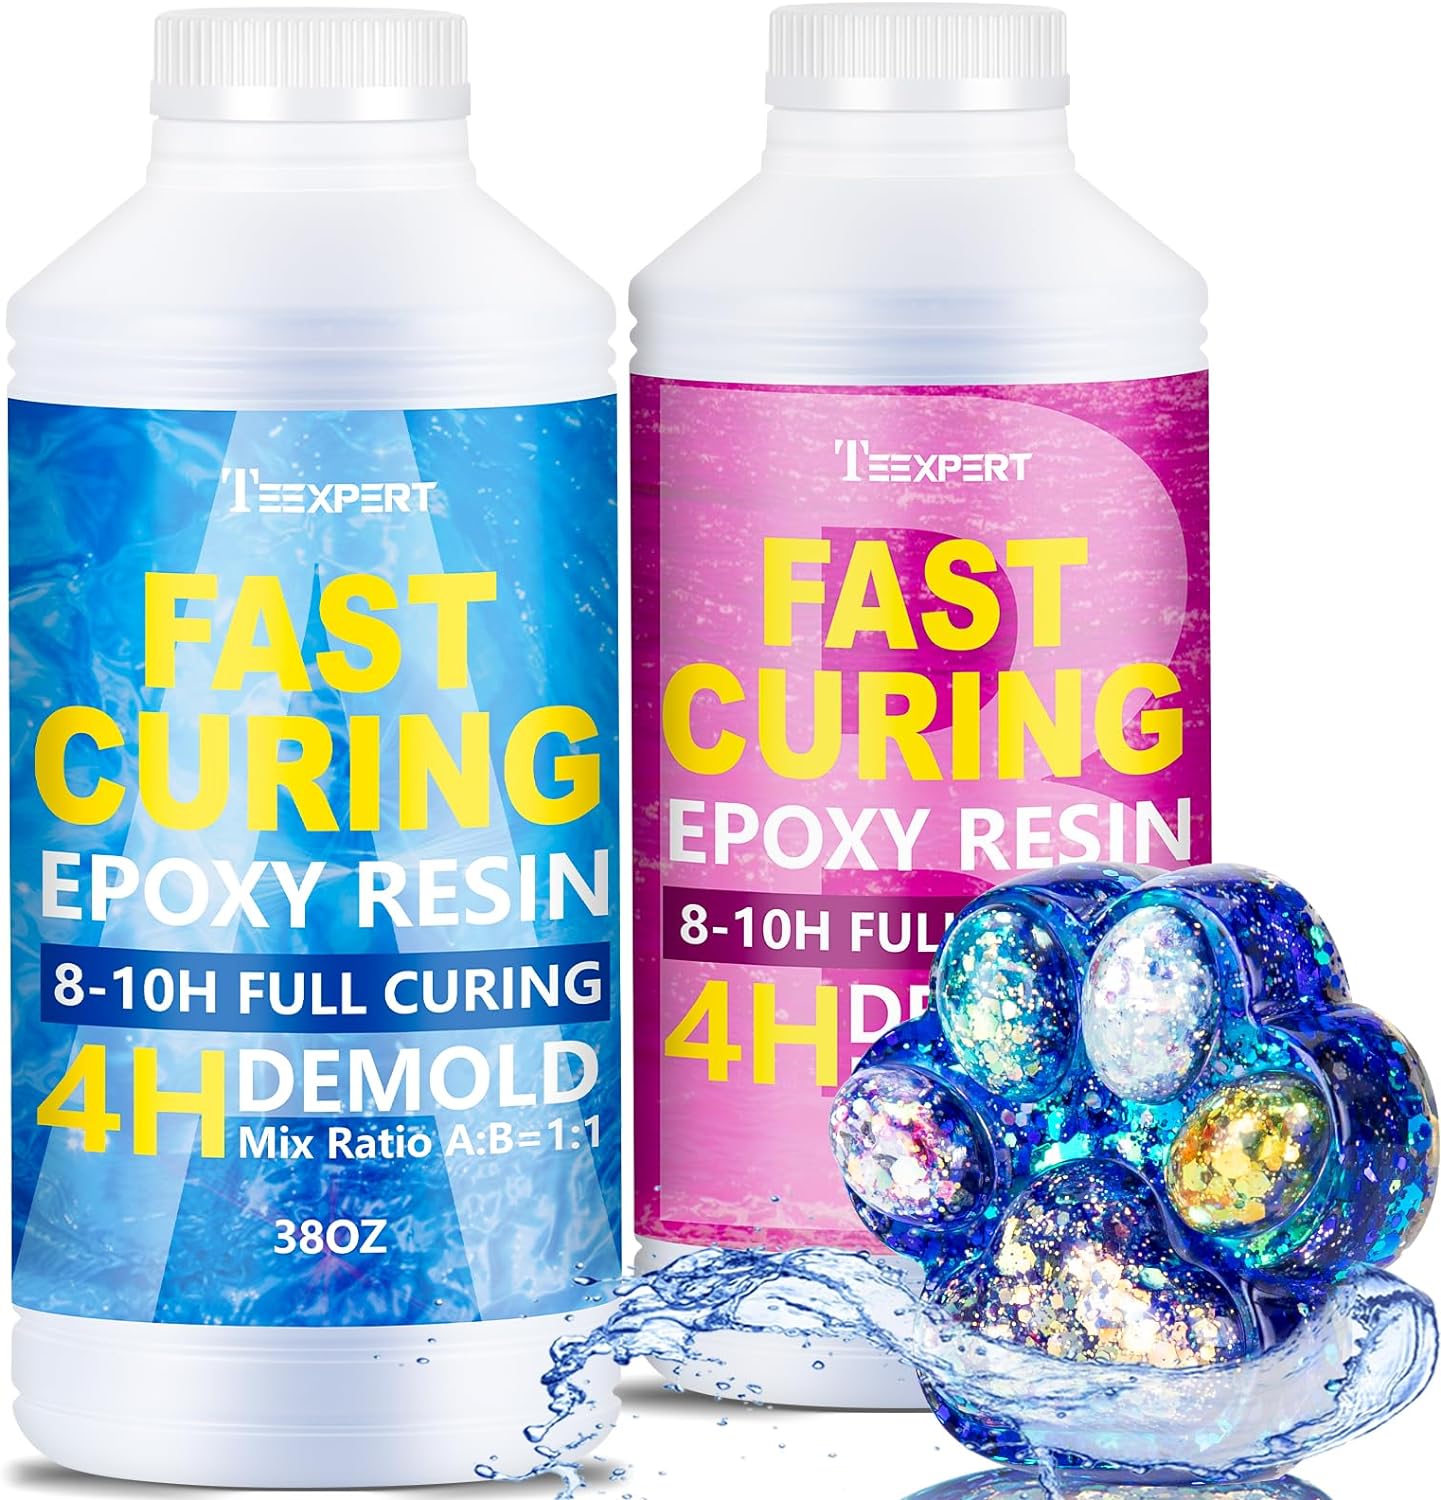 Teexpert Fast Curing Epoxy Resin - 76oz casting and coating resin